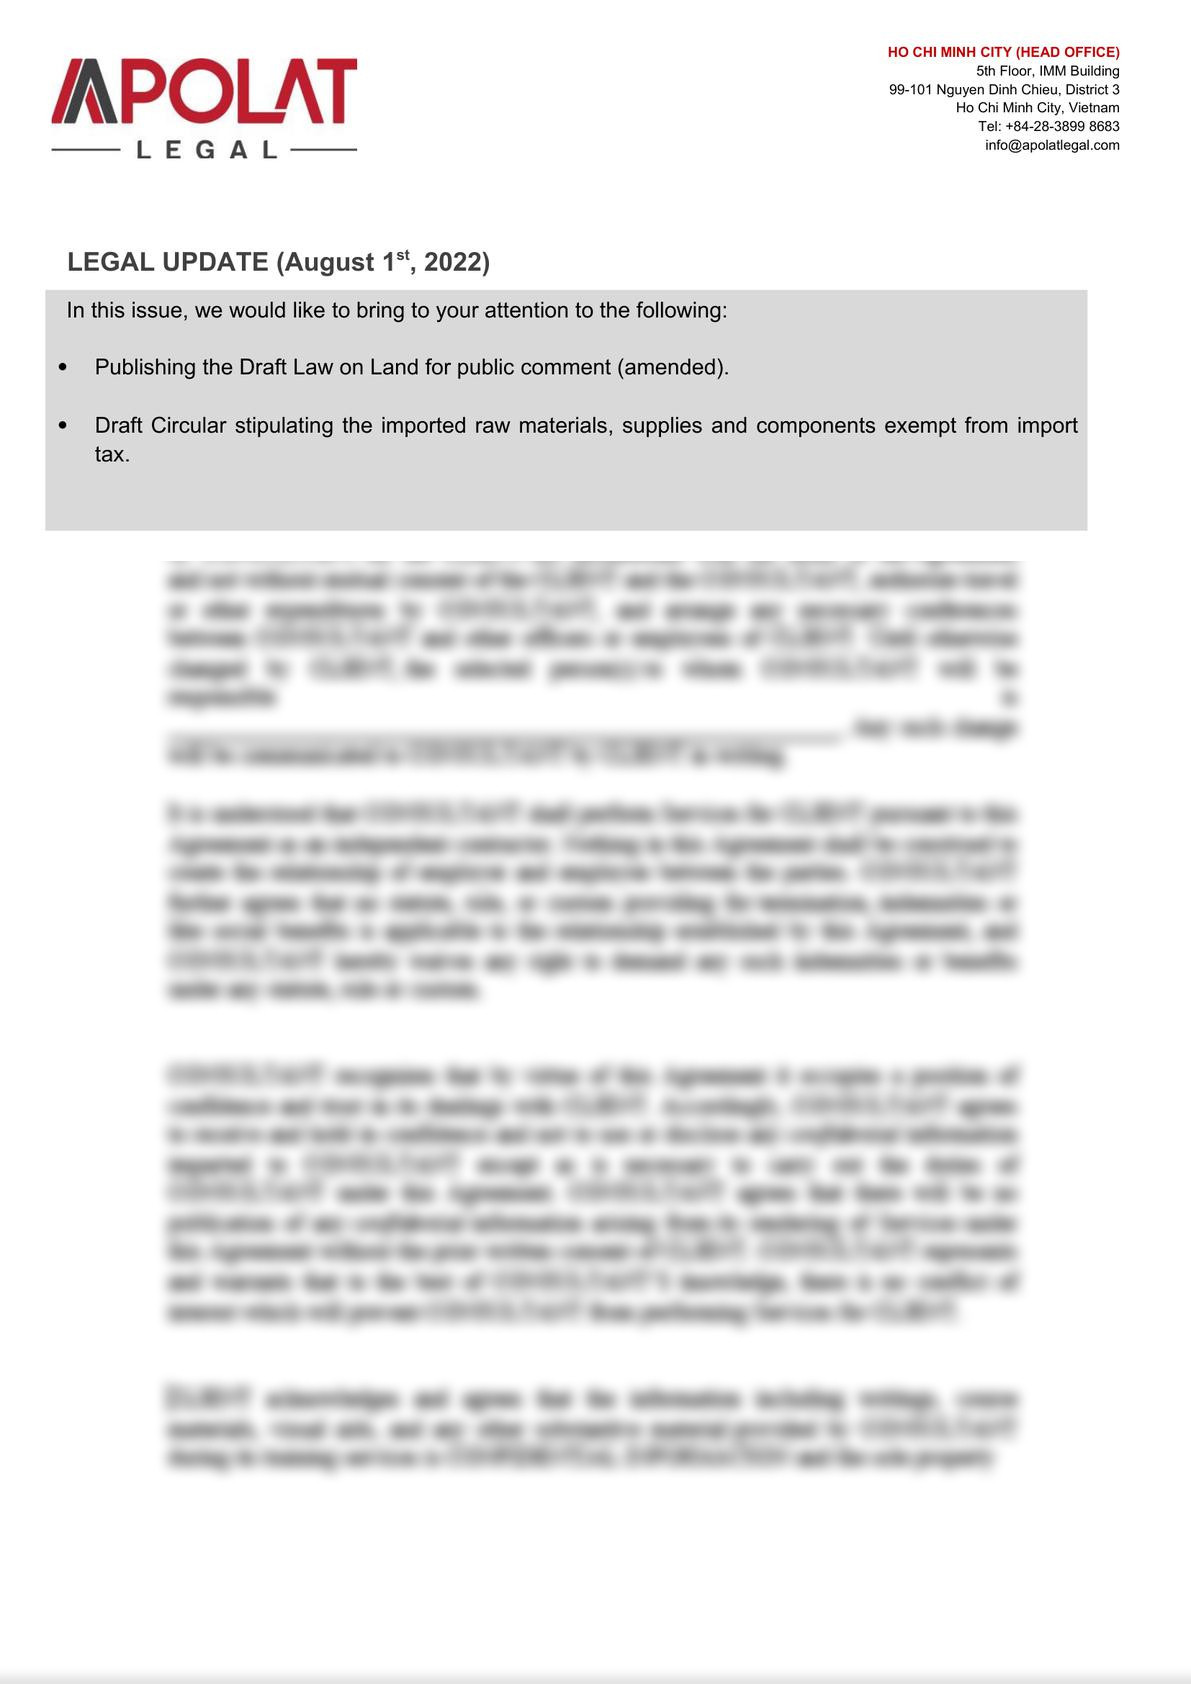 Legal update: Publishing the Draft Law on Land for public comment (amended) -0